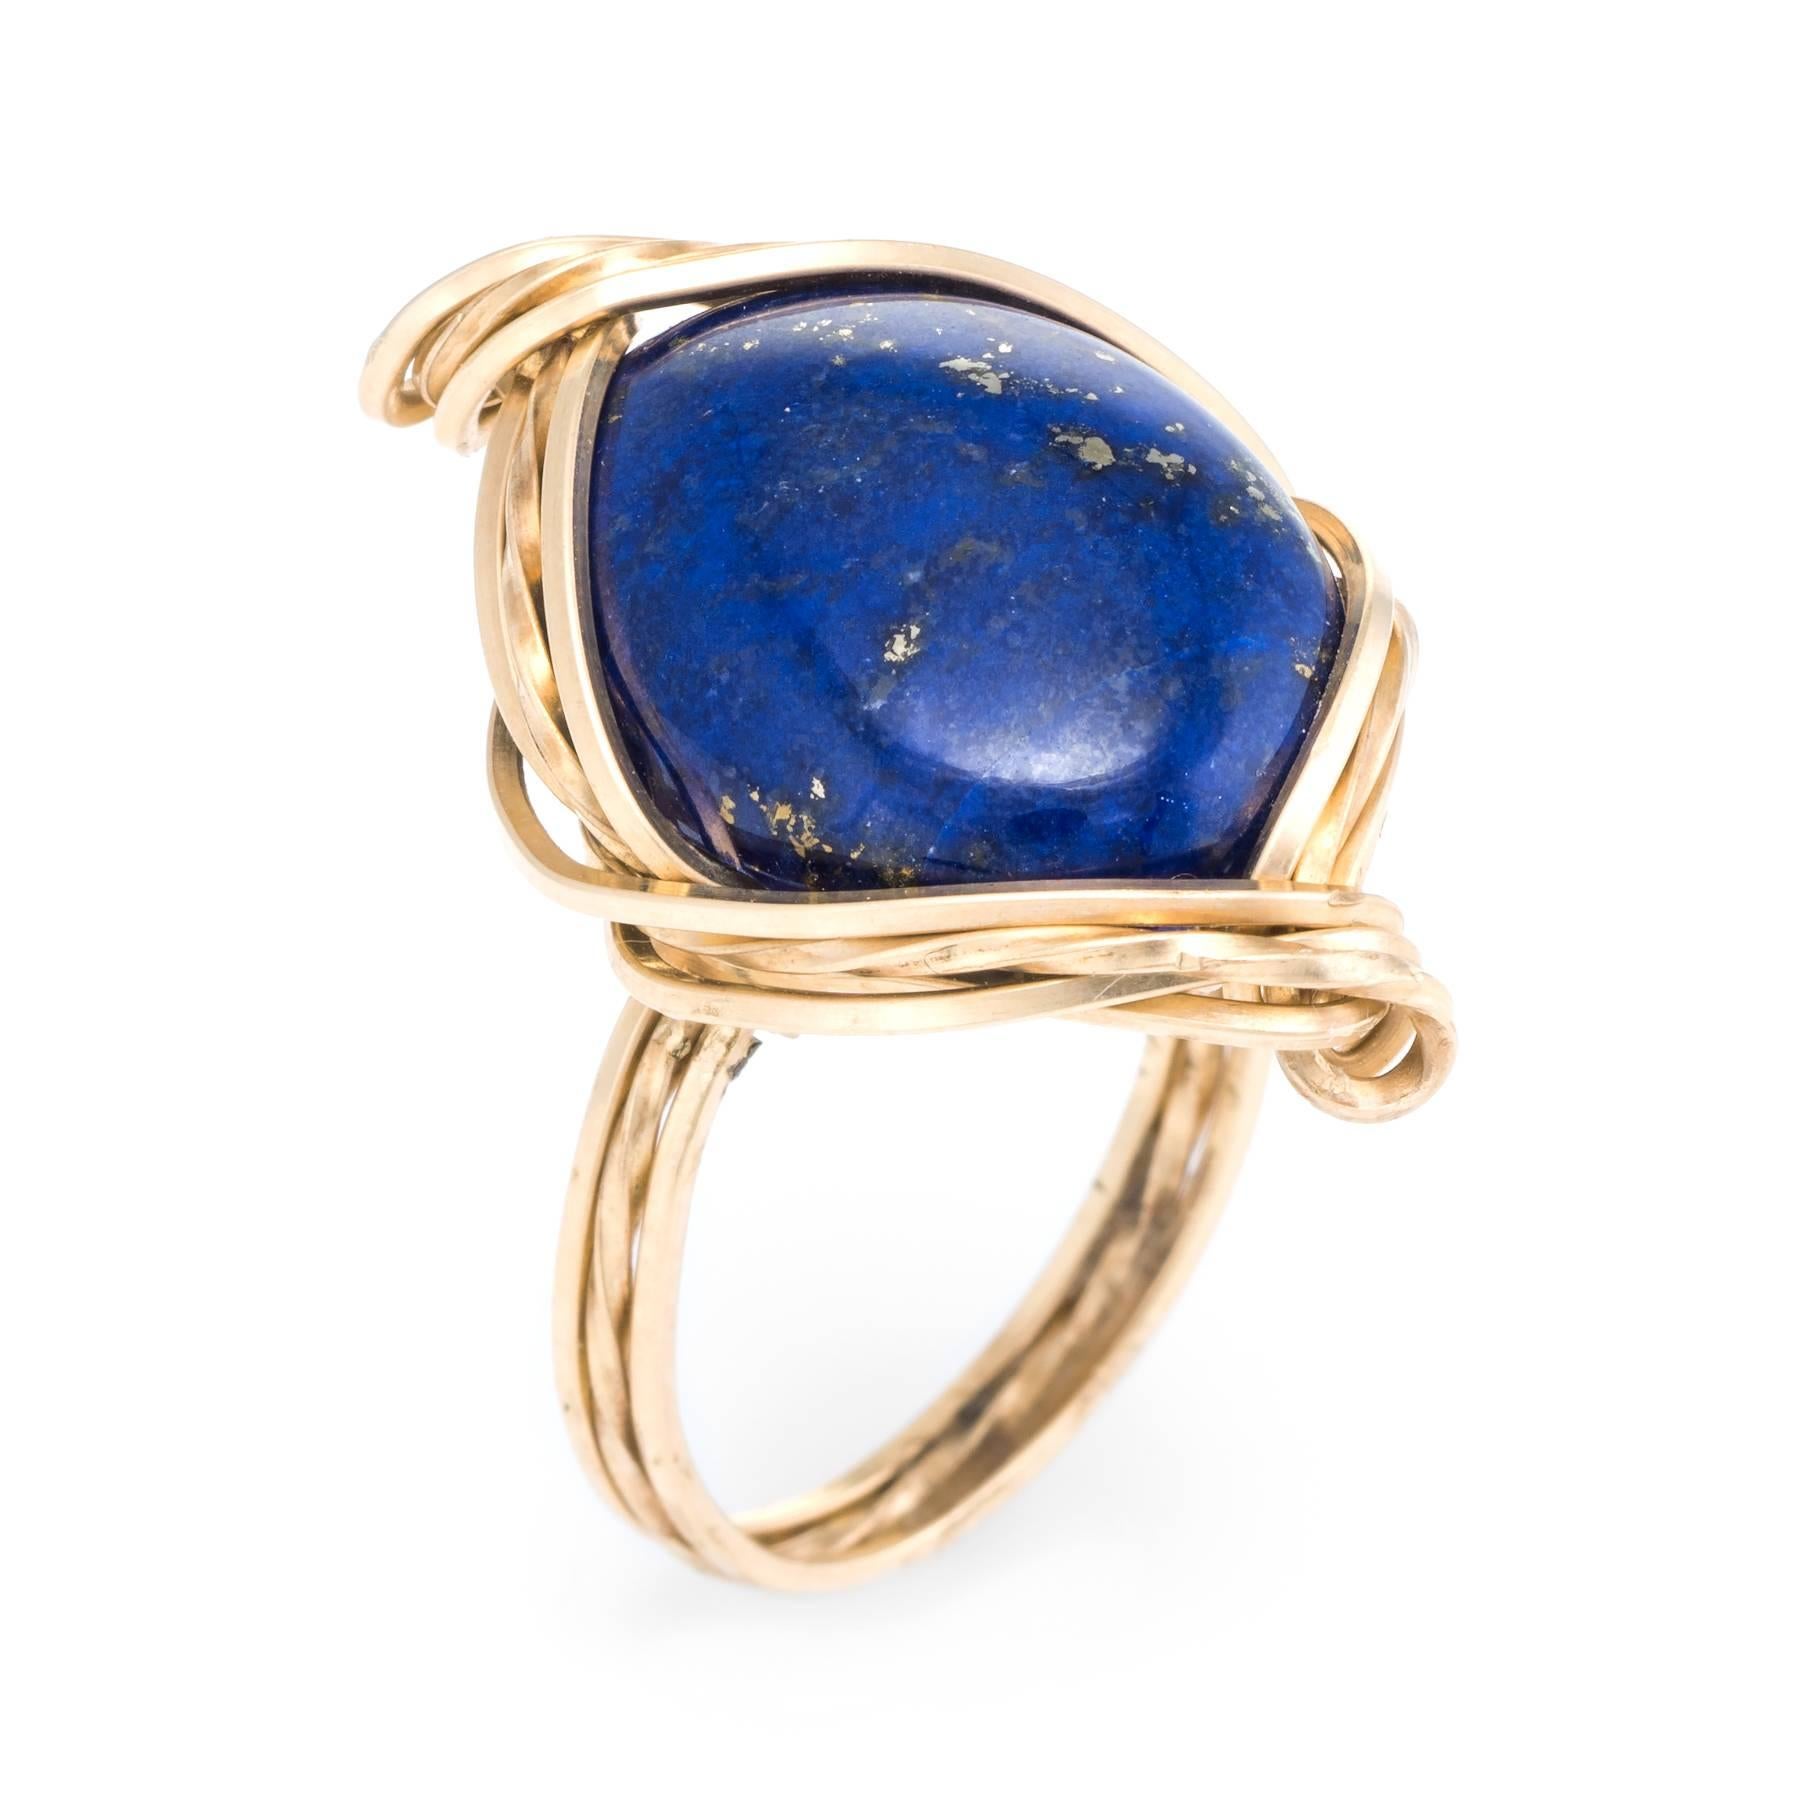 Elegant vintage cocktail ring (circa 1960s to 1970s), crafted in 14 karat yellow gold. 

Centrally mounted cabochon cut lapis lazuli measures 18mm x 16mm. The lapis is in excellent condition and free of cracks or chips.   

Unique coiled design